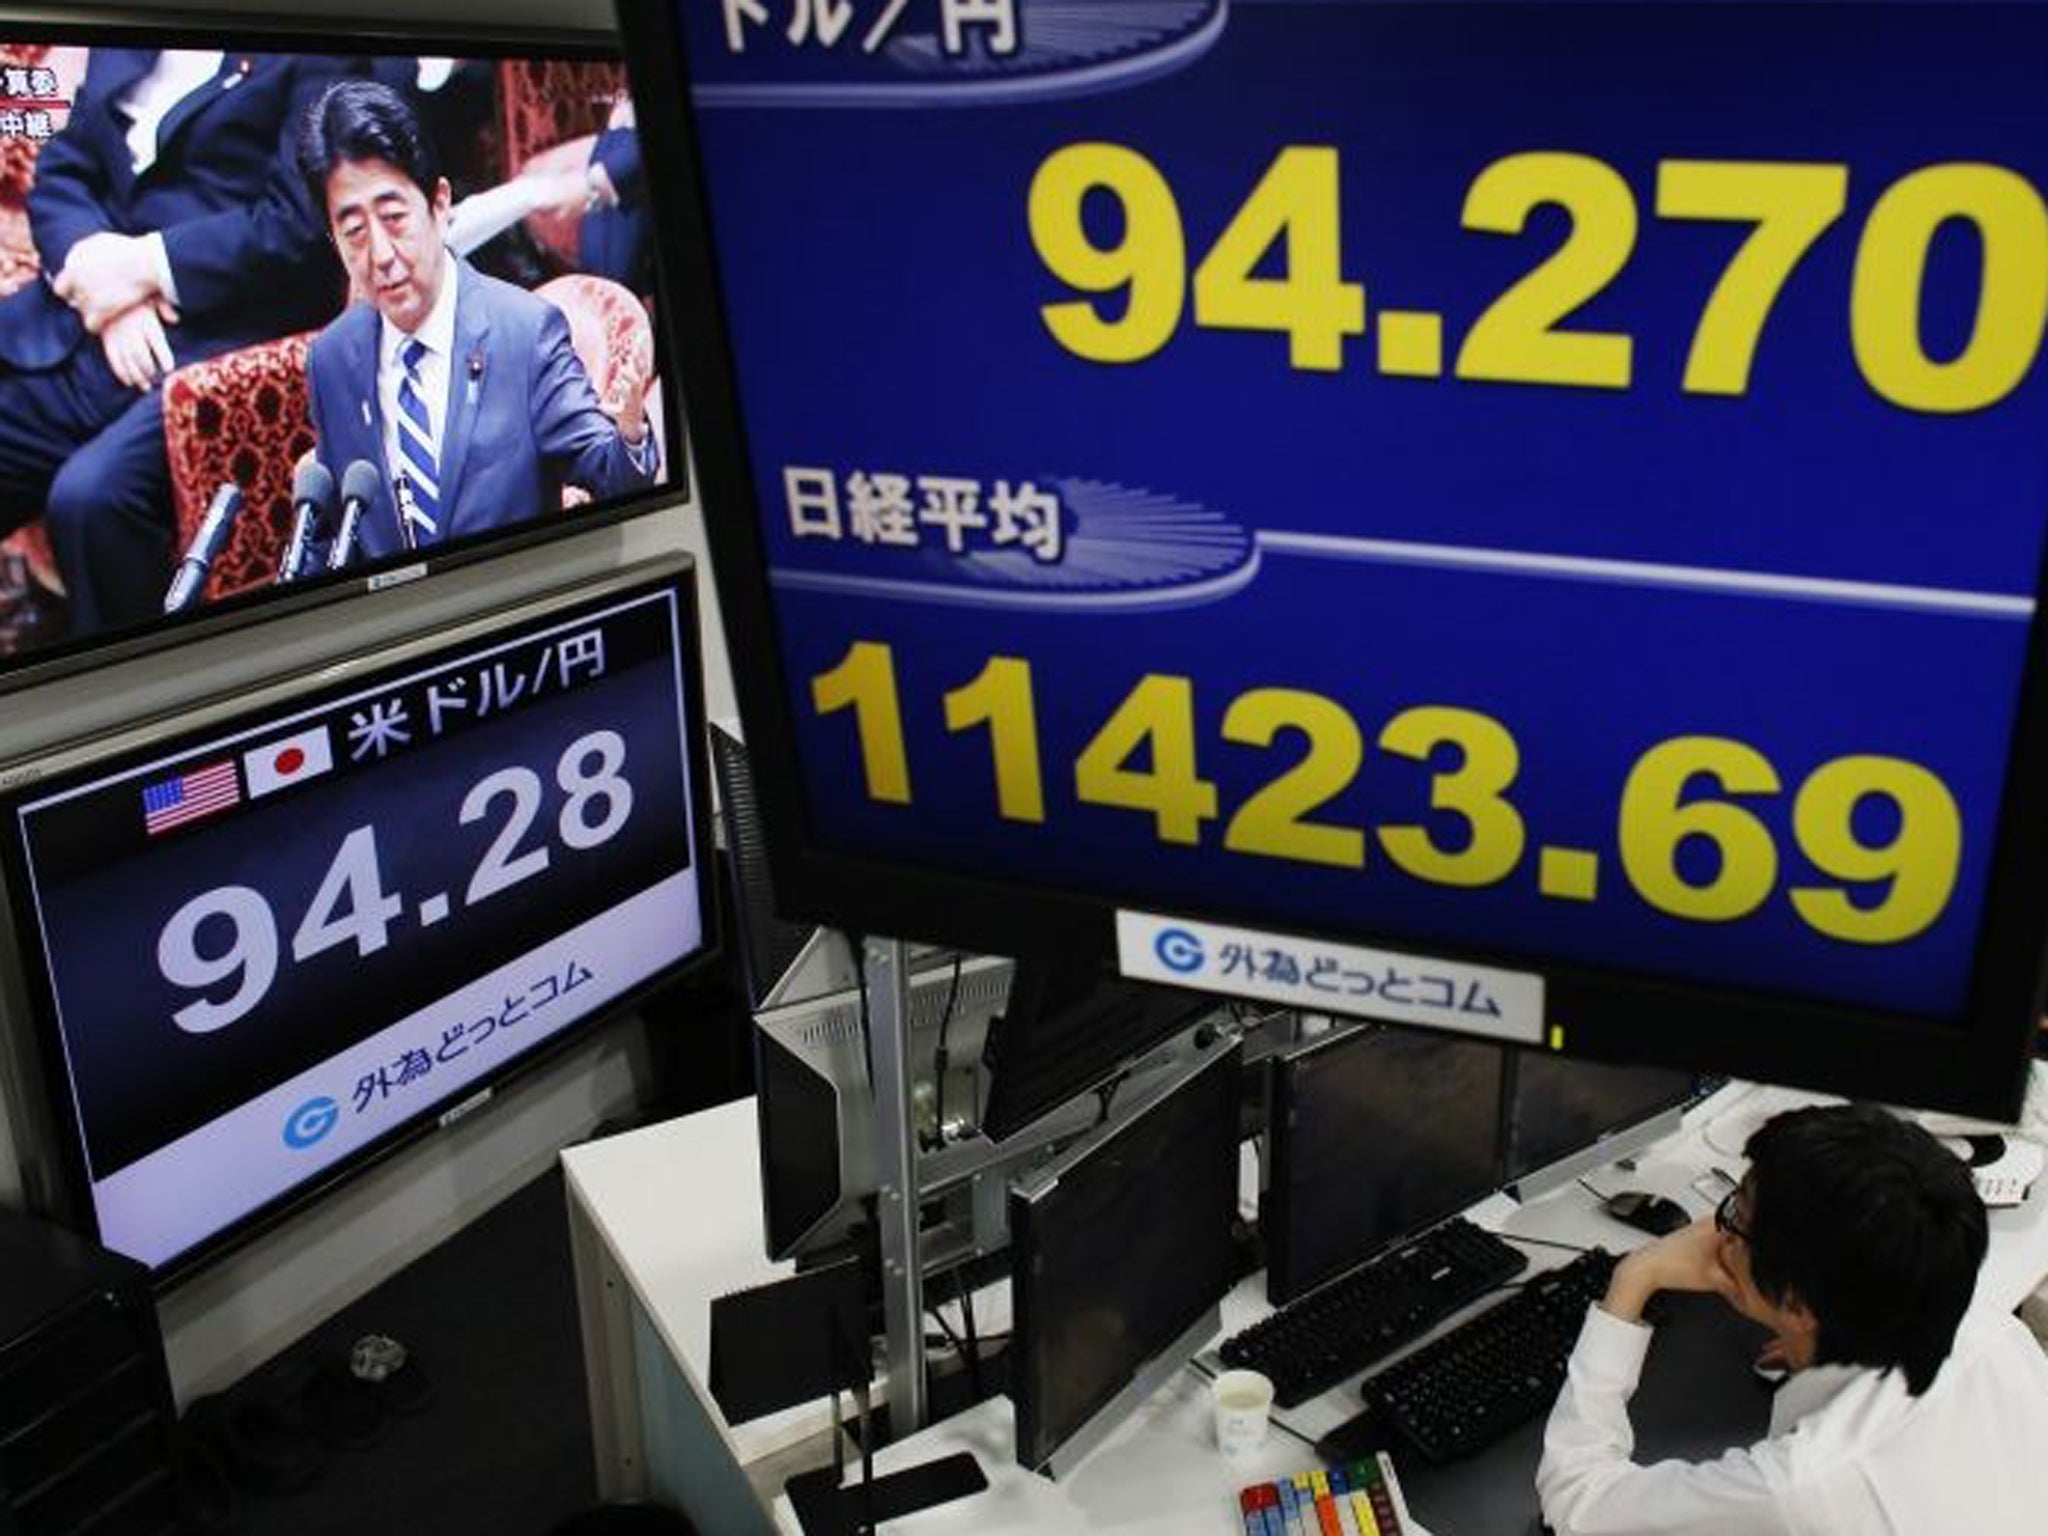 The Japanese Prime Minister Shinzo Abe has embarked on a huge programme of monetary and fiscal stimulus to jump start the world's third largest economy out of its third recession in five years